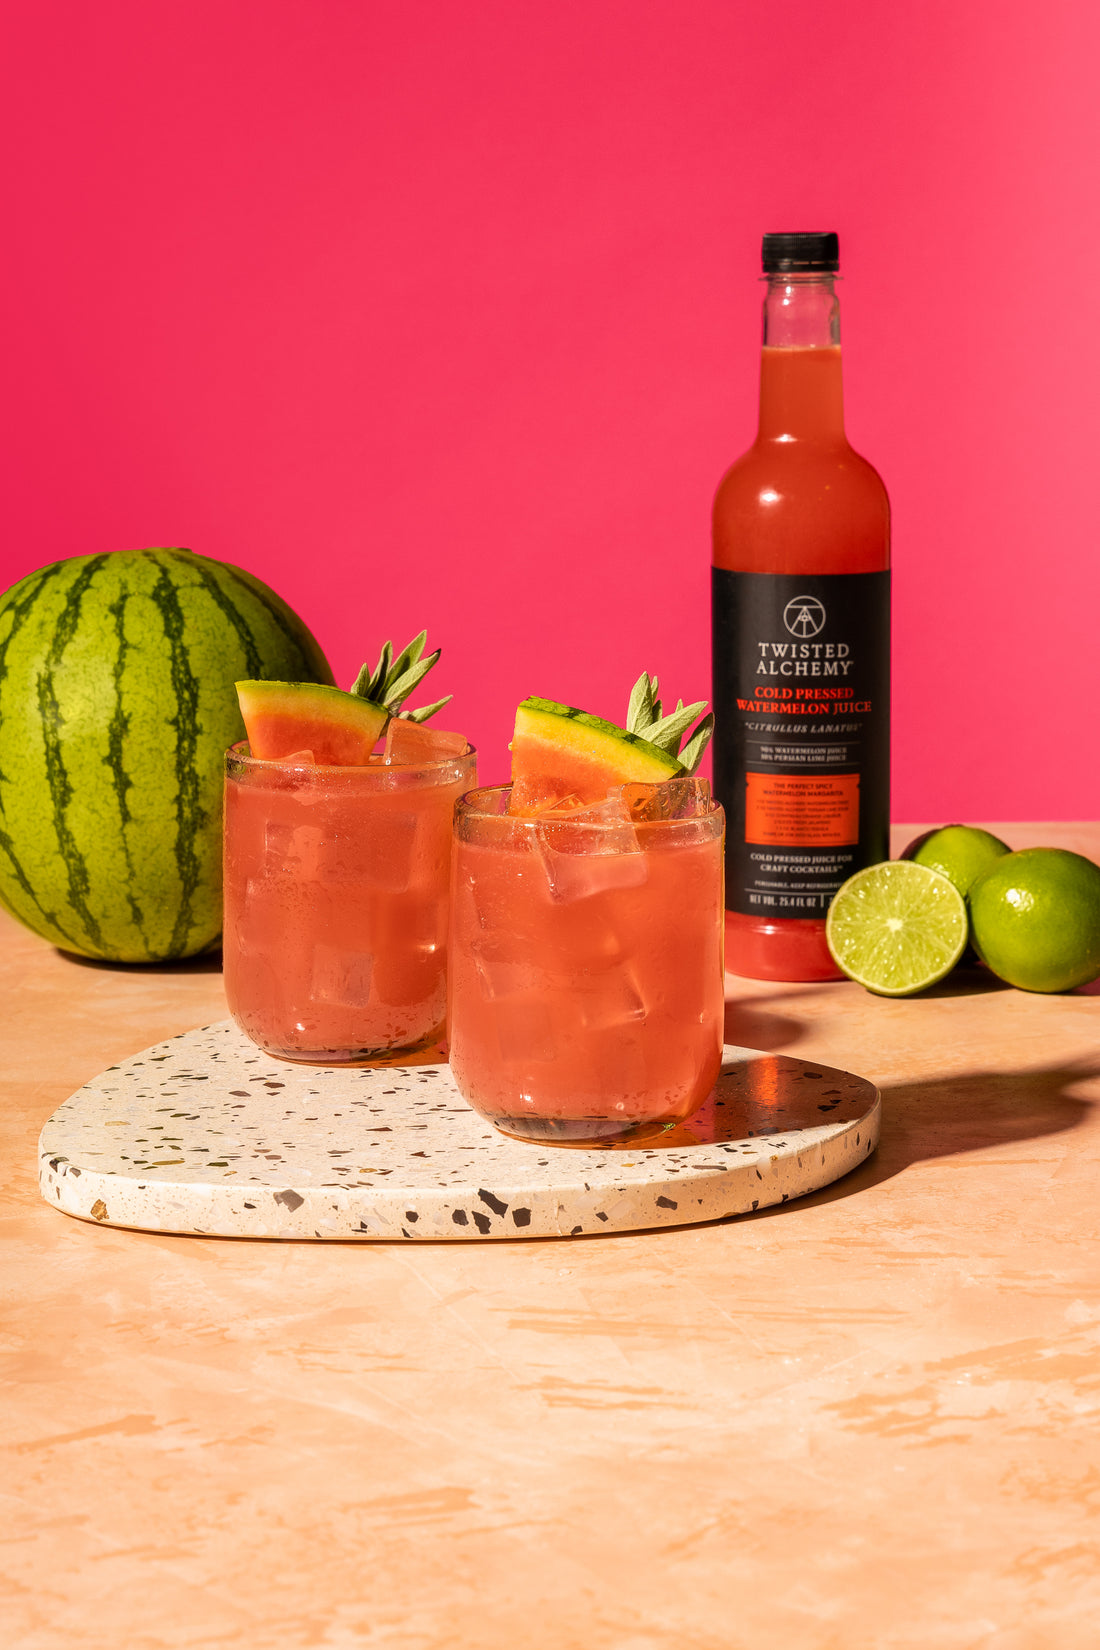 Two cocktails with watermelon slice garnishes sit in front of a bottle of watermelon juice next to three limes and a whole watermelon.